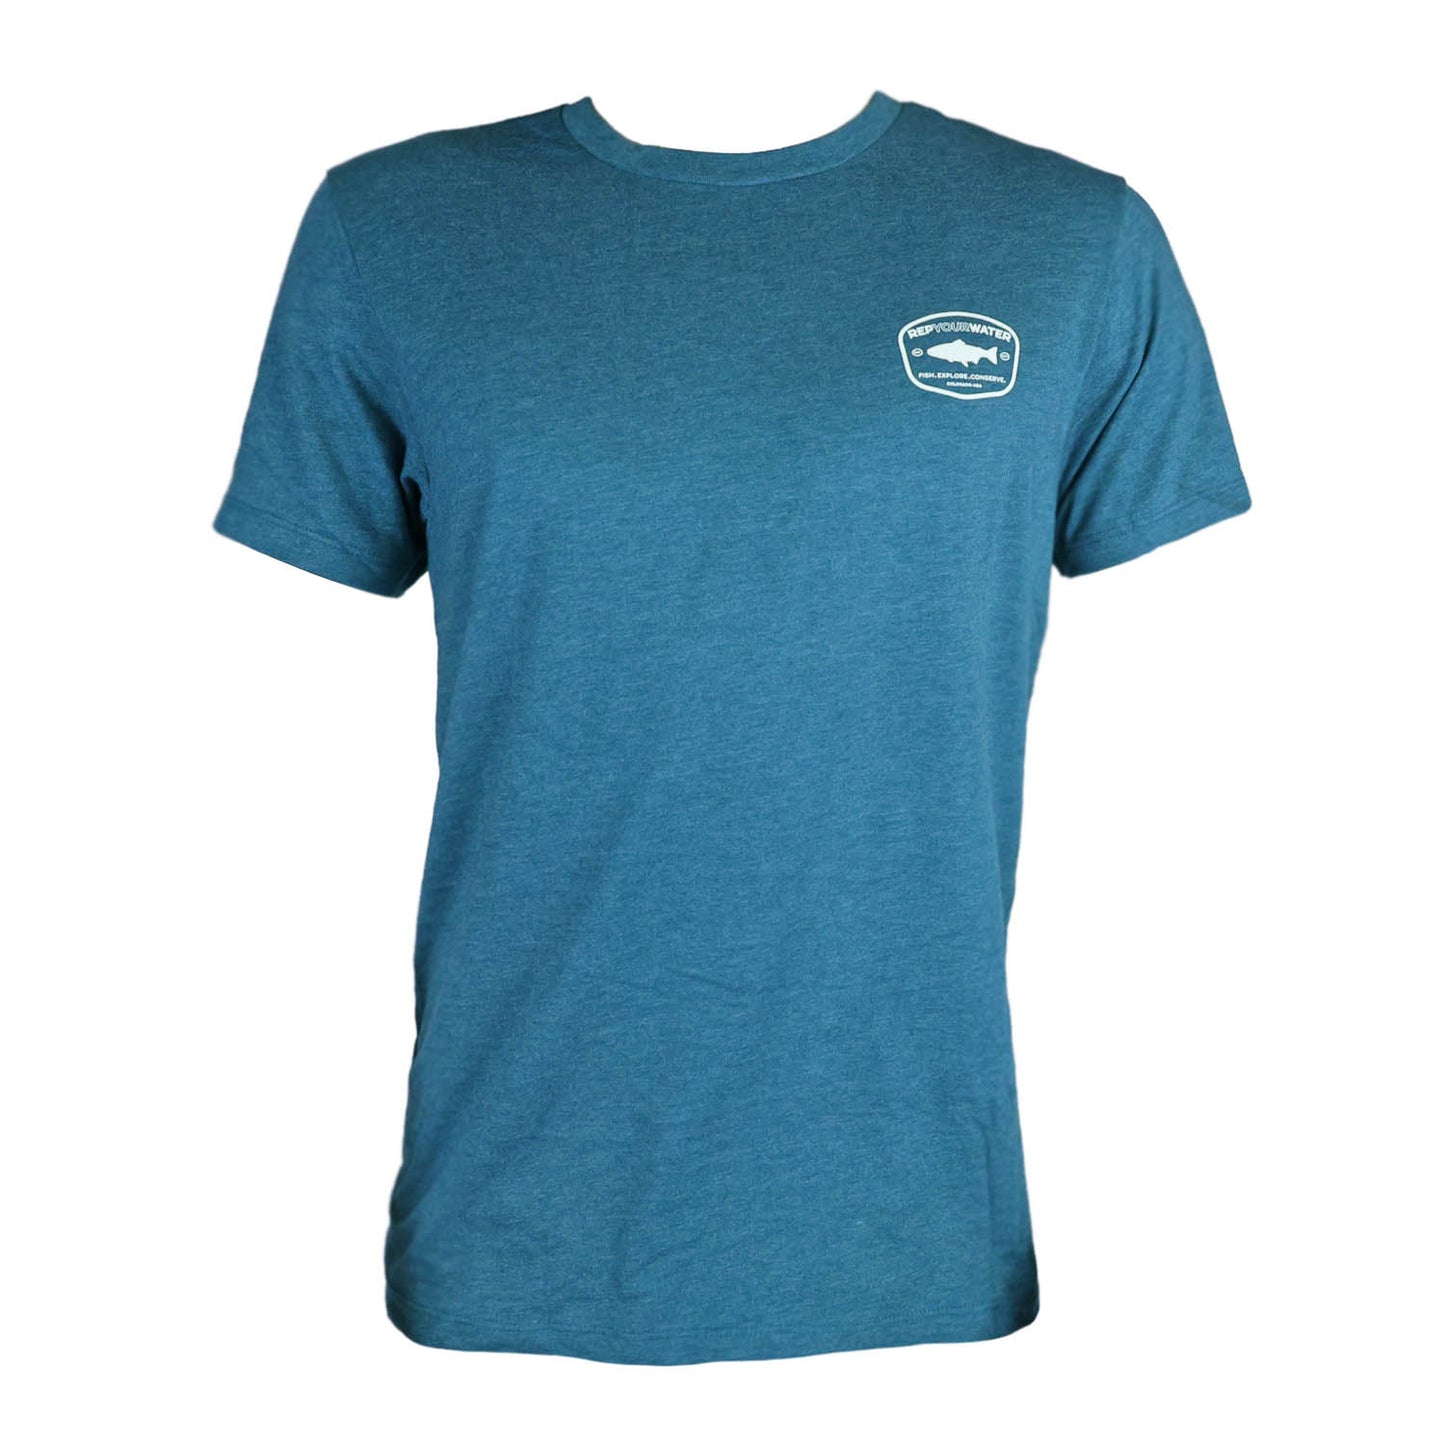 The front of a blue shirt that says RepYourWater, fish explore conserve, Colorado USA, and est 2011. on the front right chest